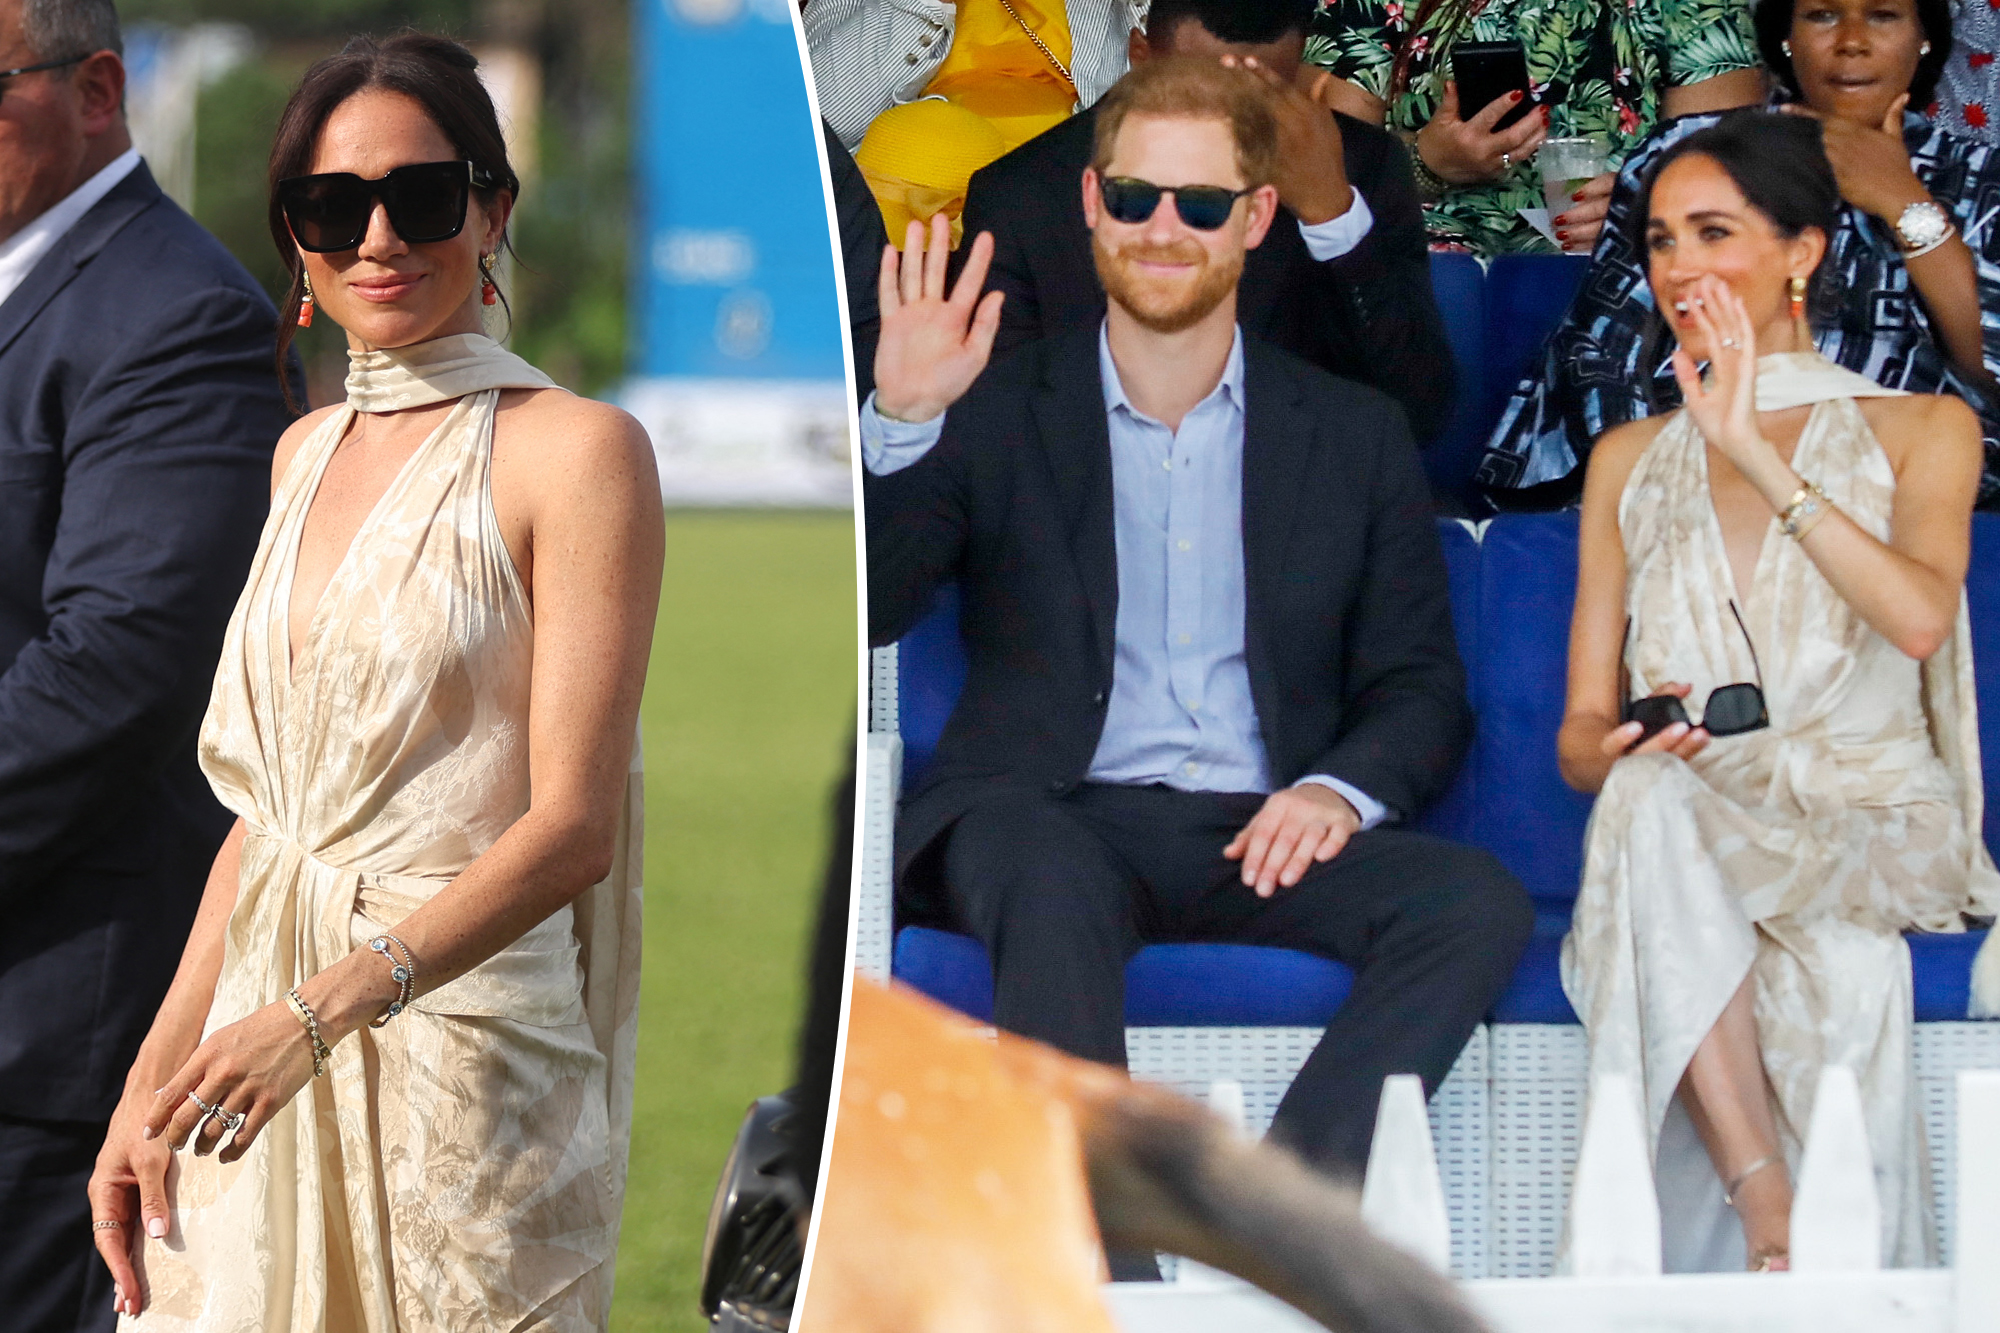 Meghan Markle Stuns in Nigerian Fashion for Final Day with Prince Harry